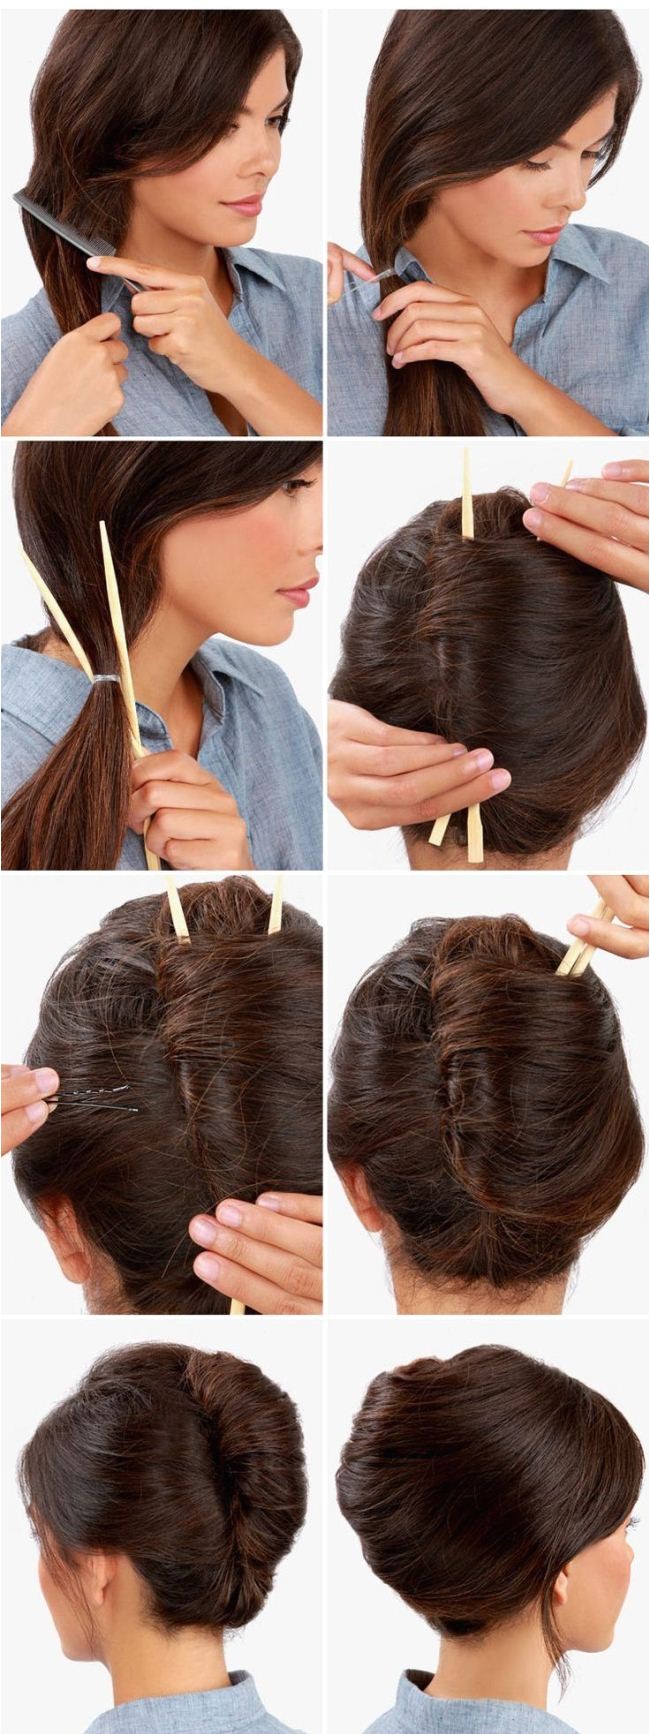 Hairstyle for Party Easy to Do I Want to Do Easy Party Hairstyles for Long Hair Step by